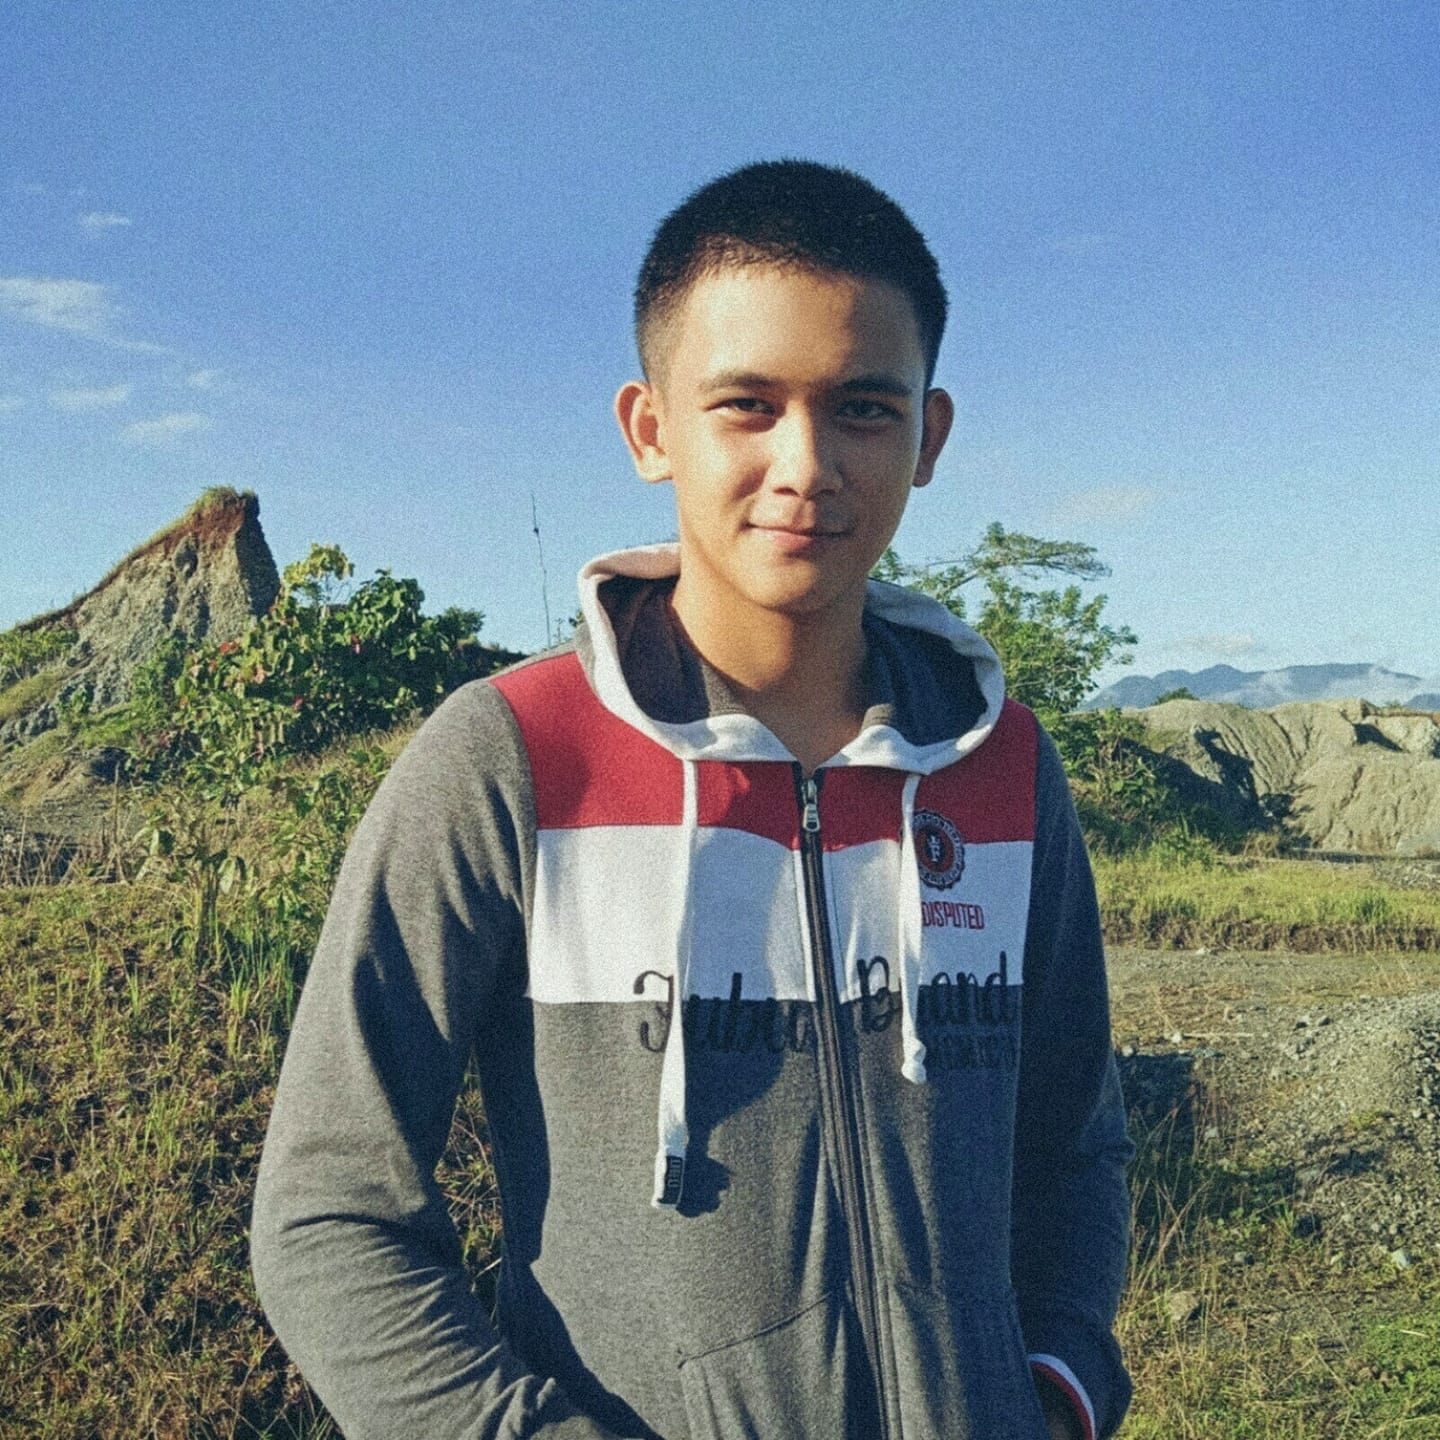 PNP Academy cadet dies after being punched by upperclassman